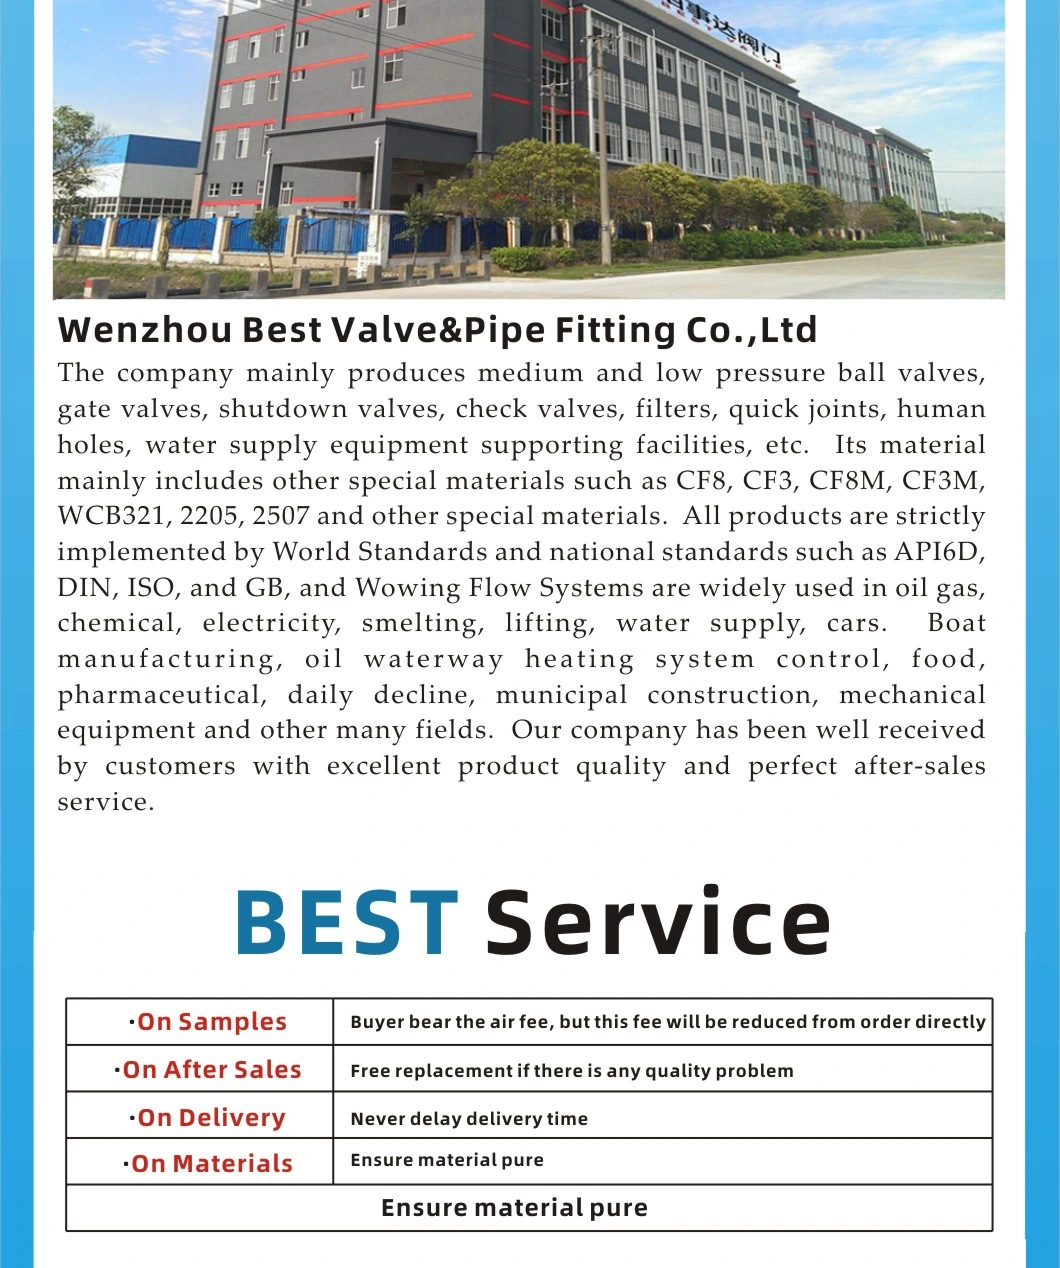 Casting Stainless Steel 304 316 Screw Threadplumbing Fittings/Pipe Fittings/Sanitary Fittings/Hardware/Connector/Valve Body/Pump Accessories/Thread Fitting